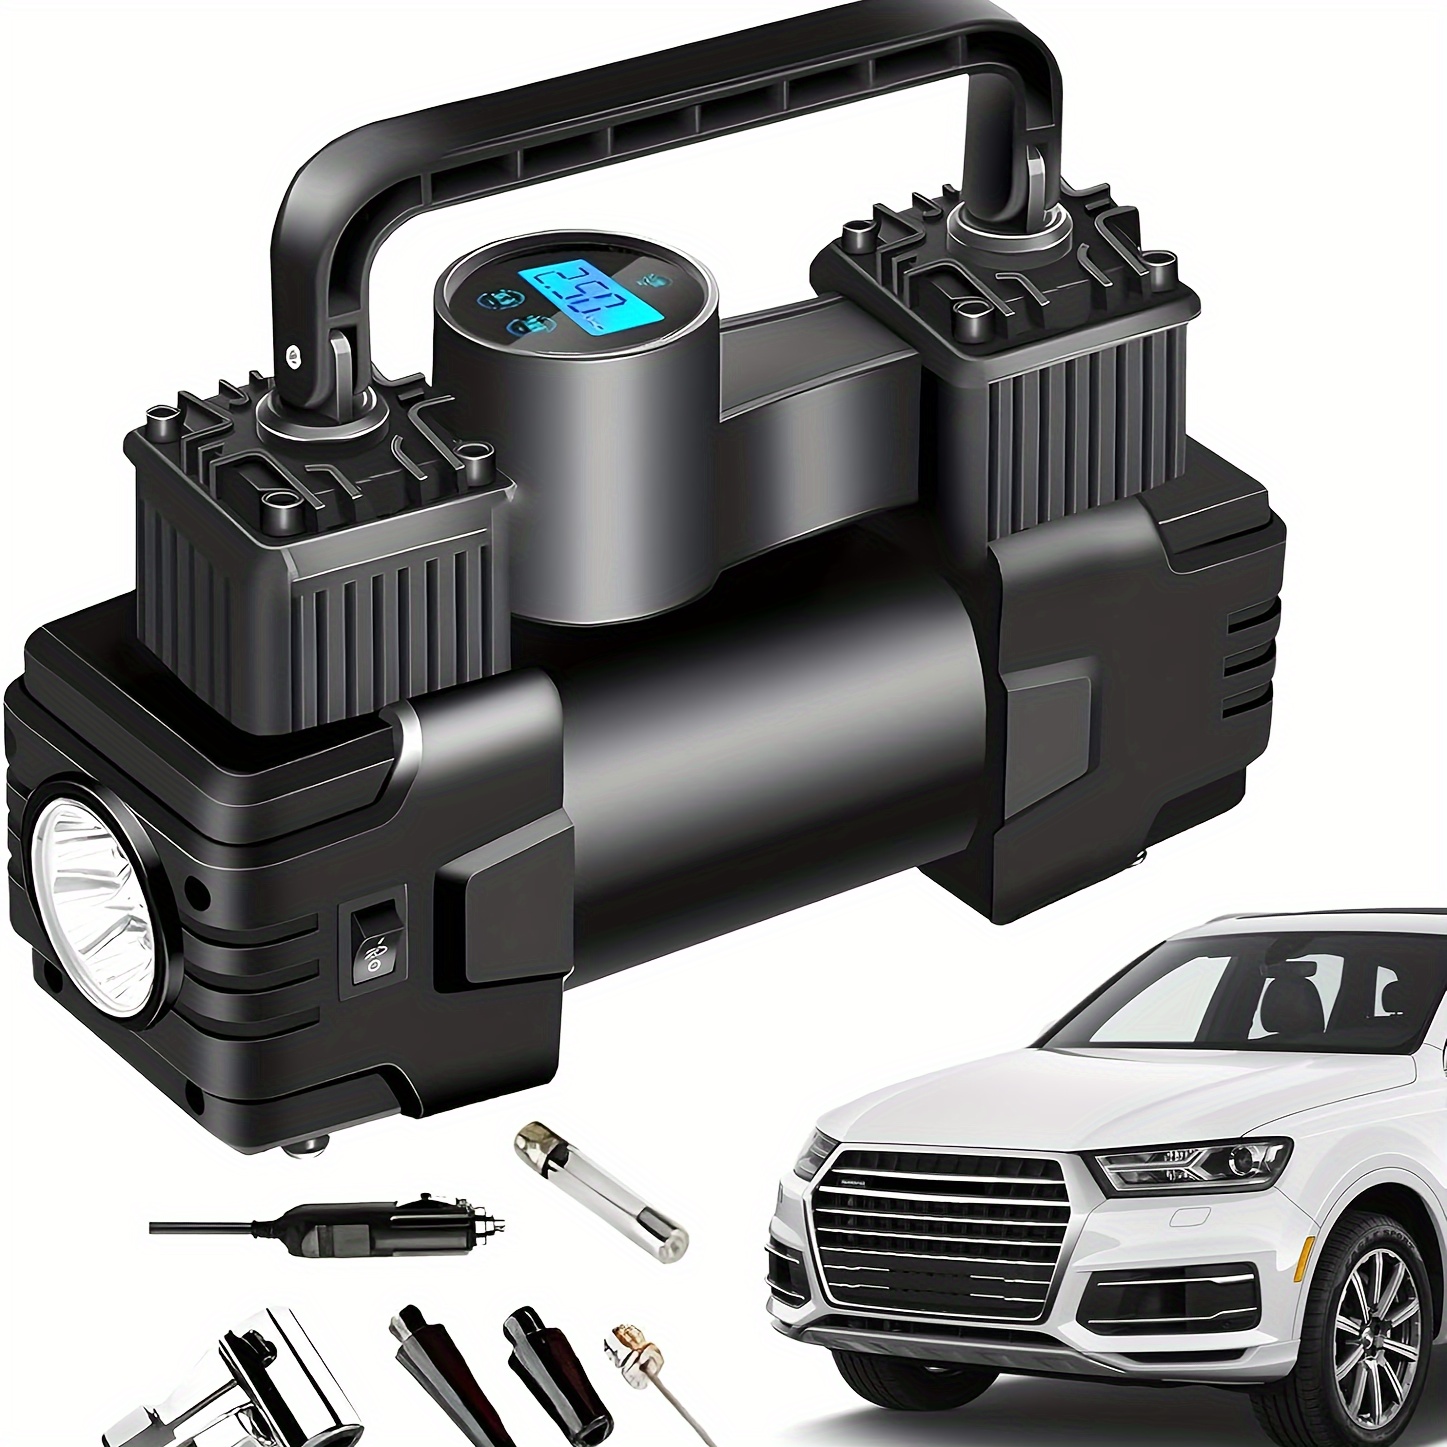 

Car Tire Pump, Auto Air Pump, Portable Air Compressor, Tire Inflator With Intelligent Numerical Control System, Tire Inflator Air Compressor With Digital Display, Truck Tire Inflator For Bicycle Moto